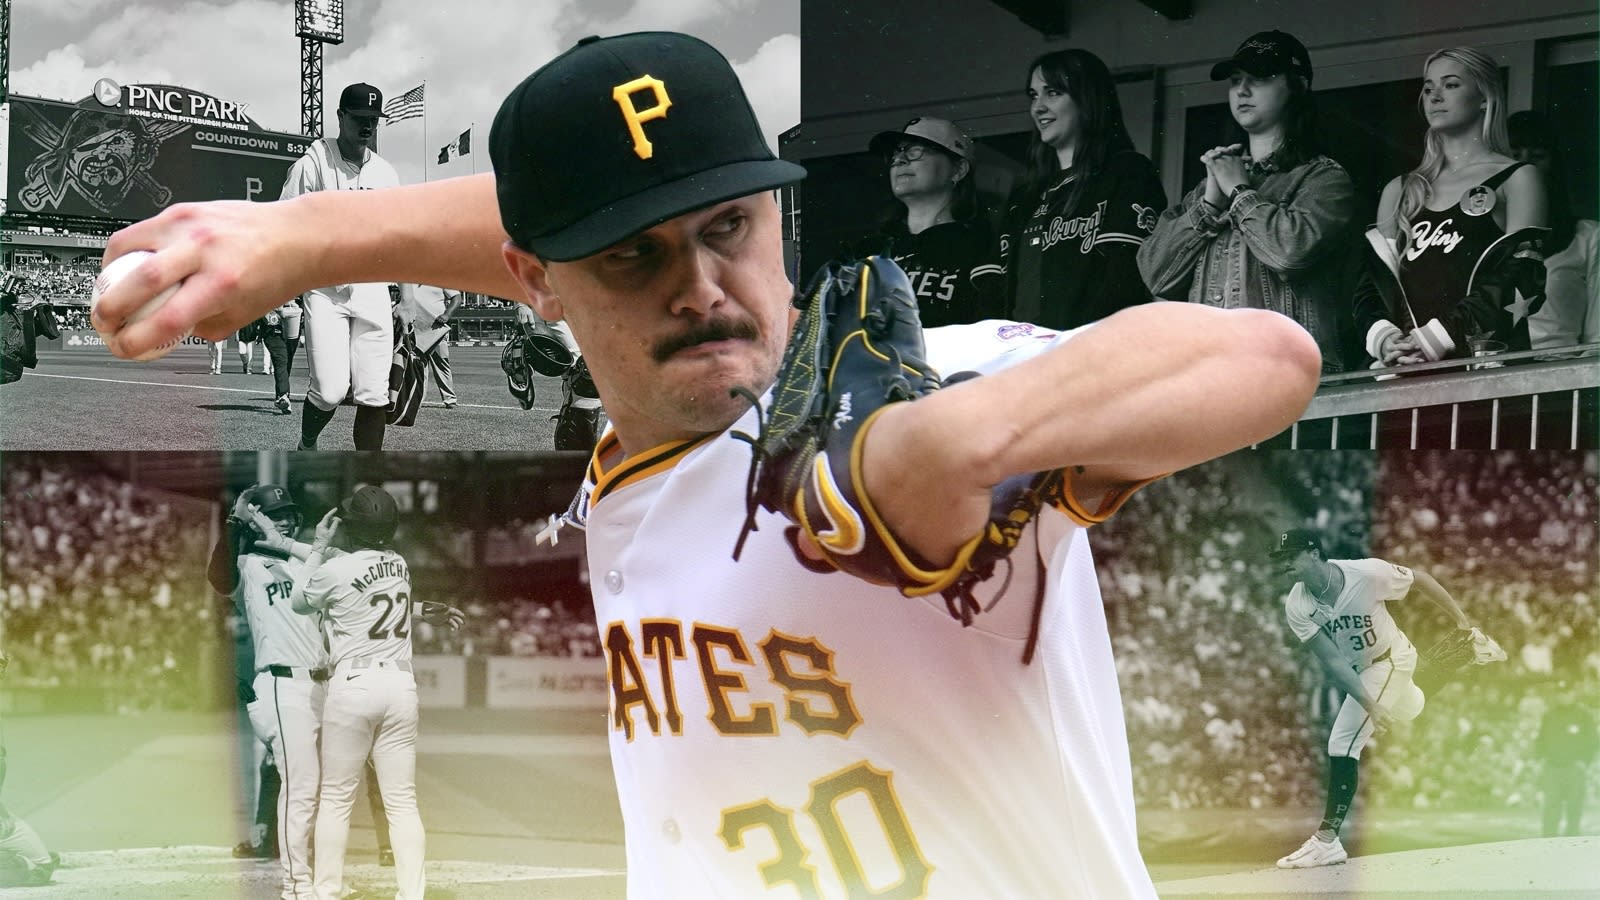 A collage of photos from Paul Skenes' MLB debut